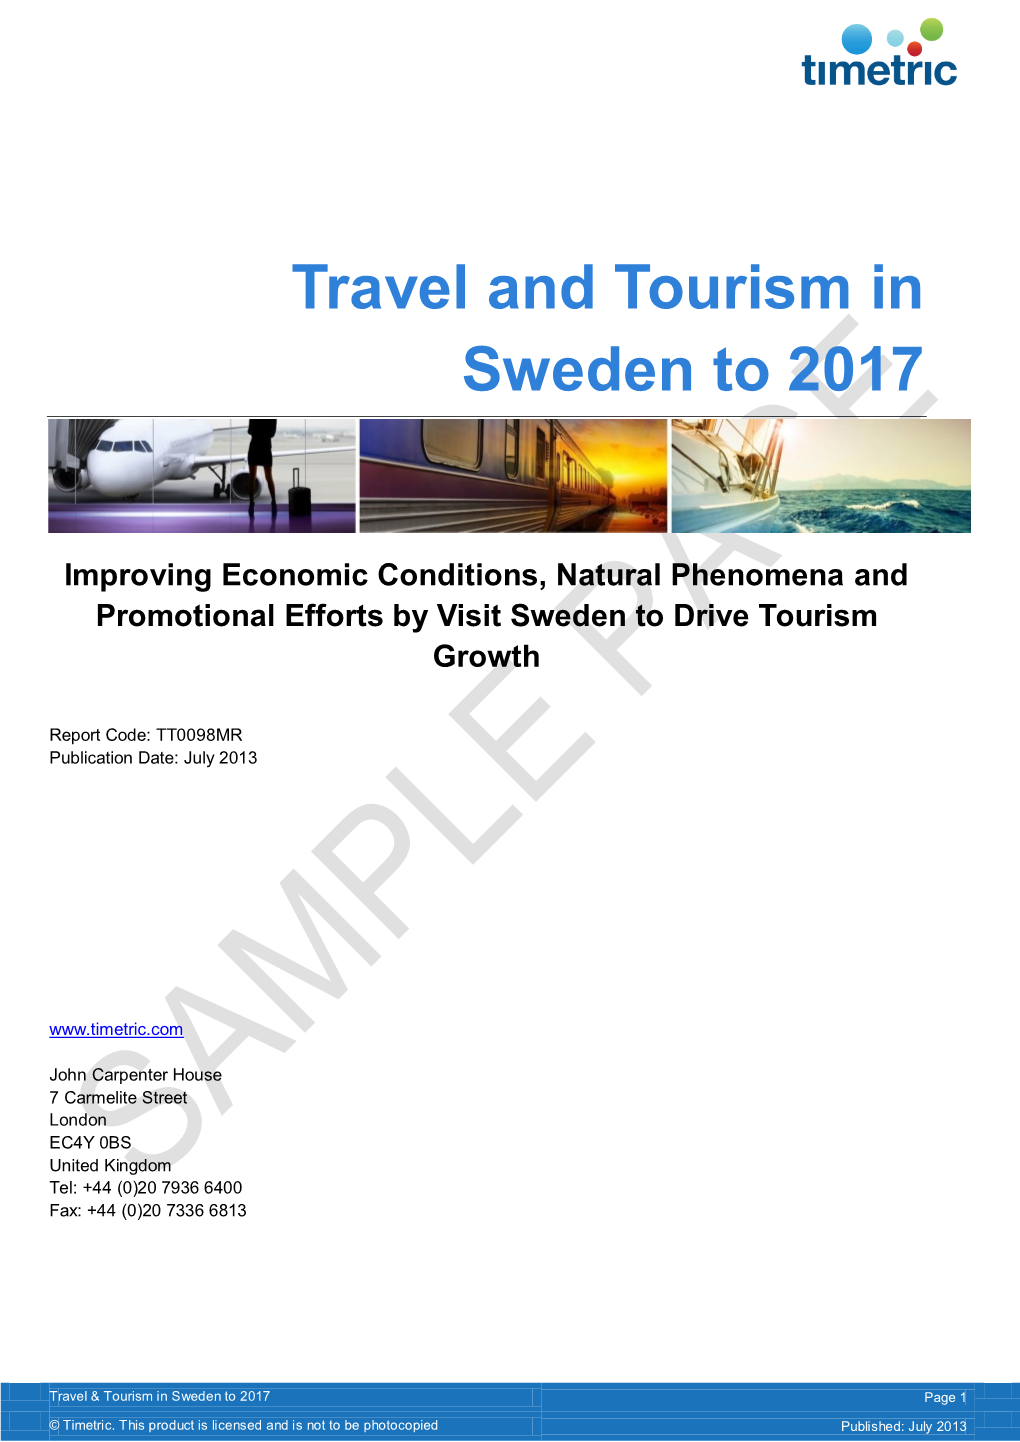 Travel and Tourism in Sweden to 2017